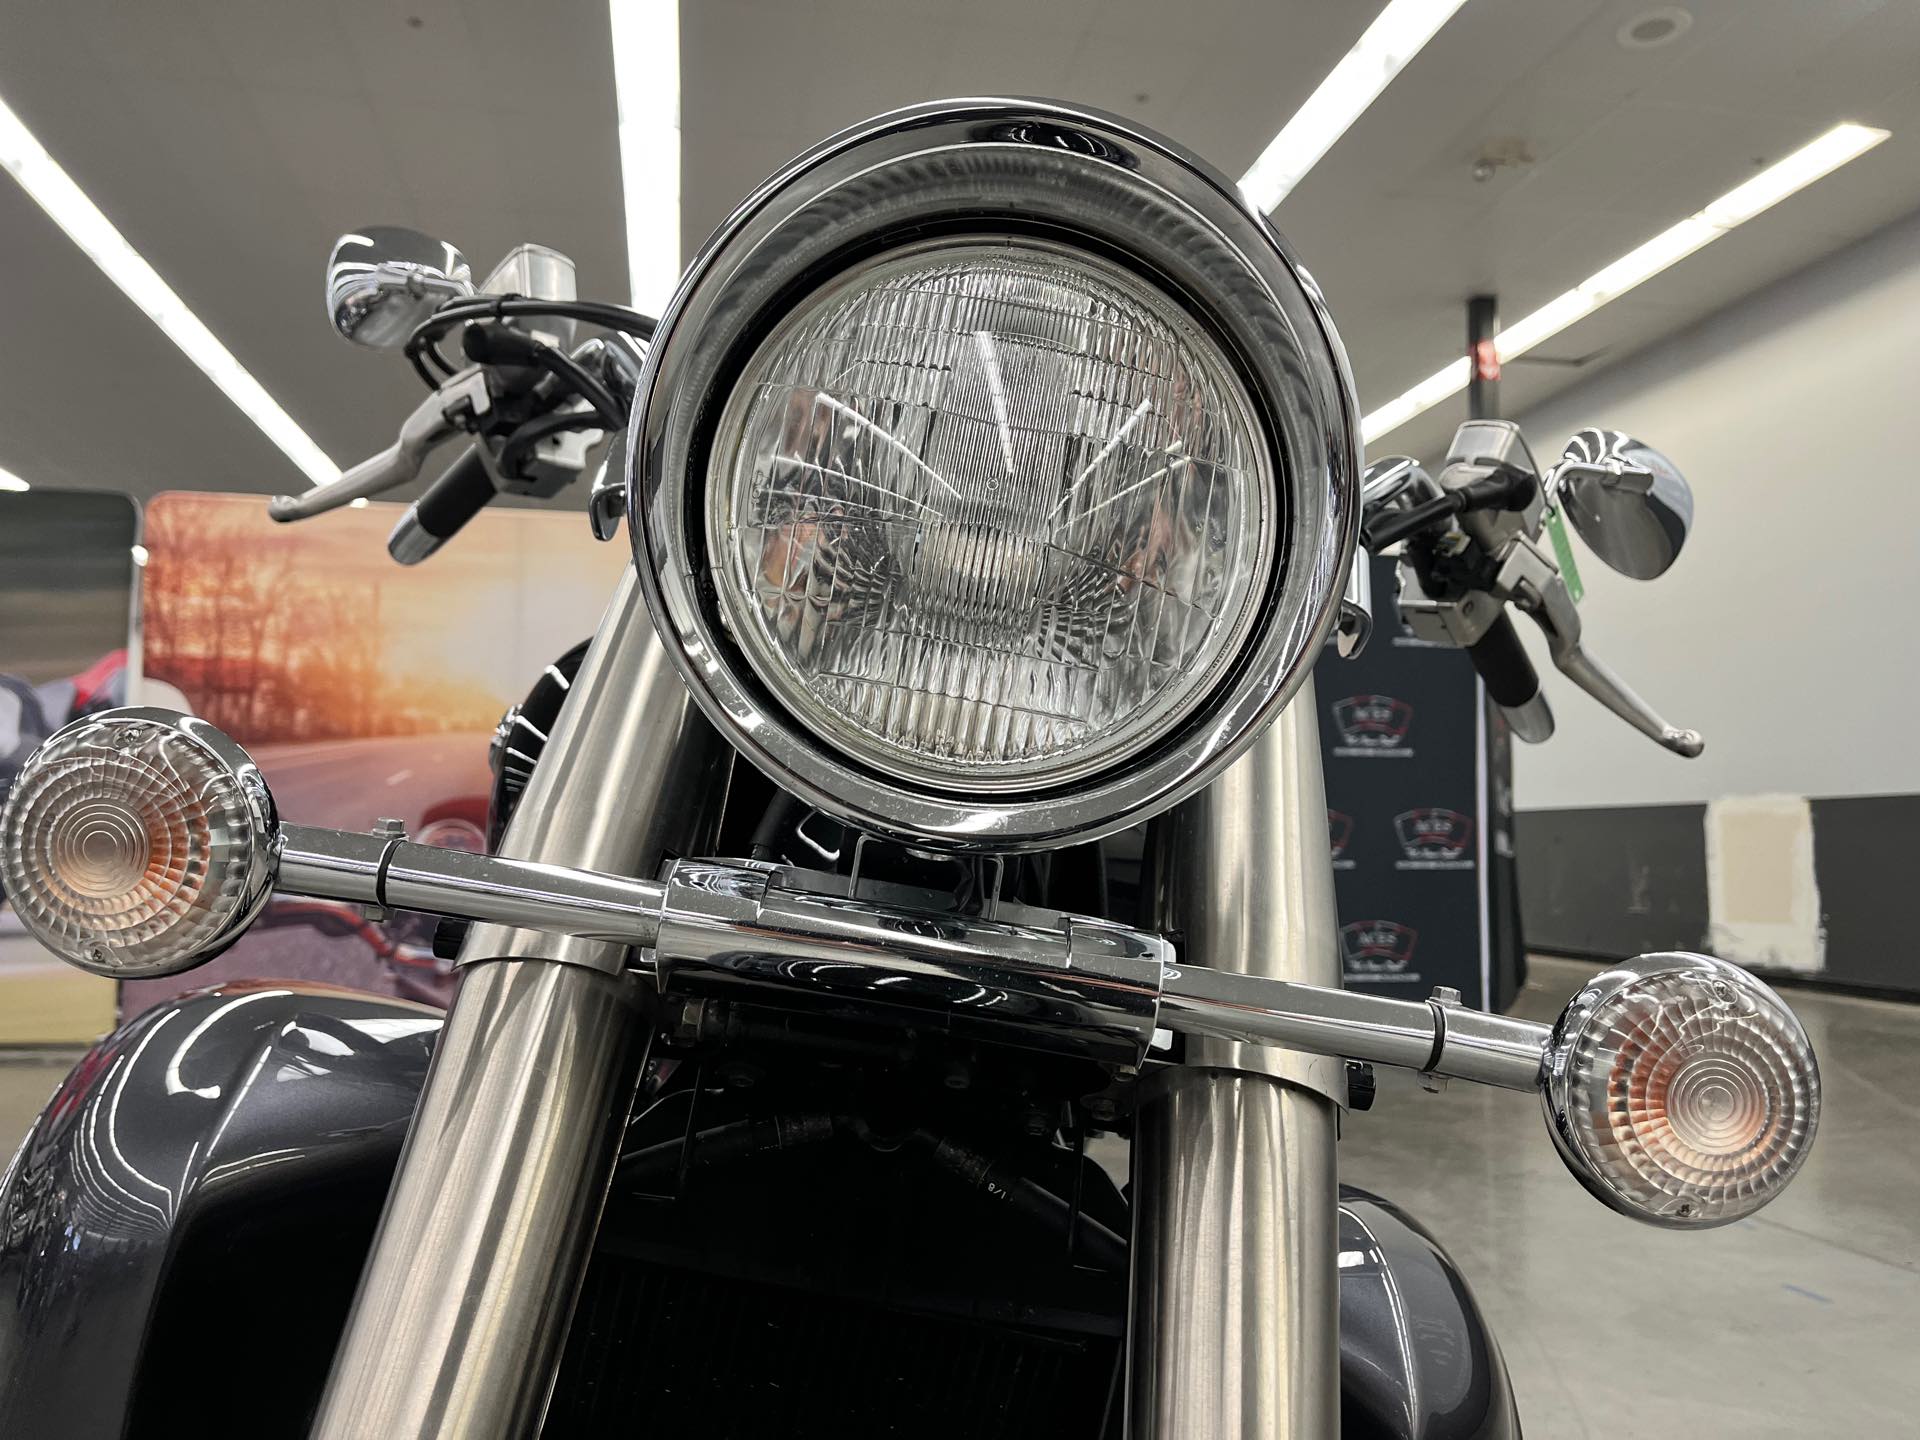 2005 Yamaha Royal Star Tour Deluxe at Aces Motorcycles - Denver